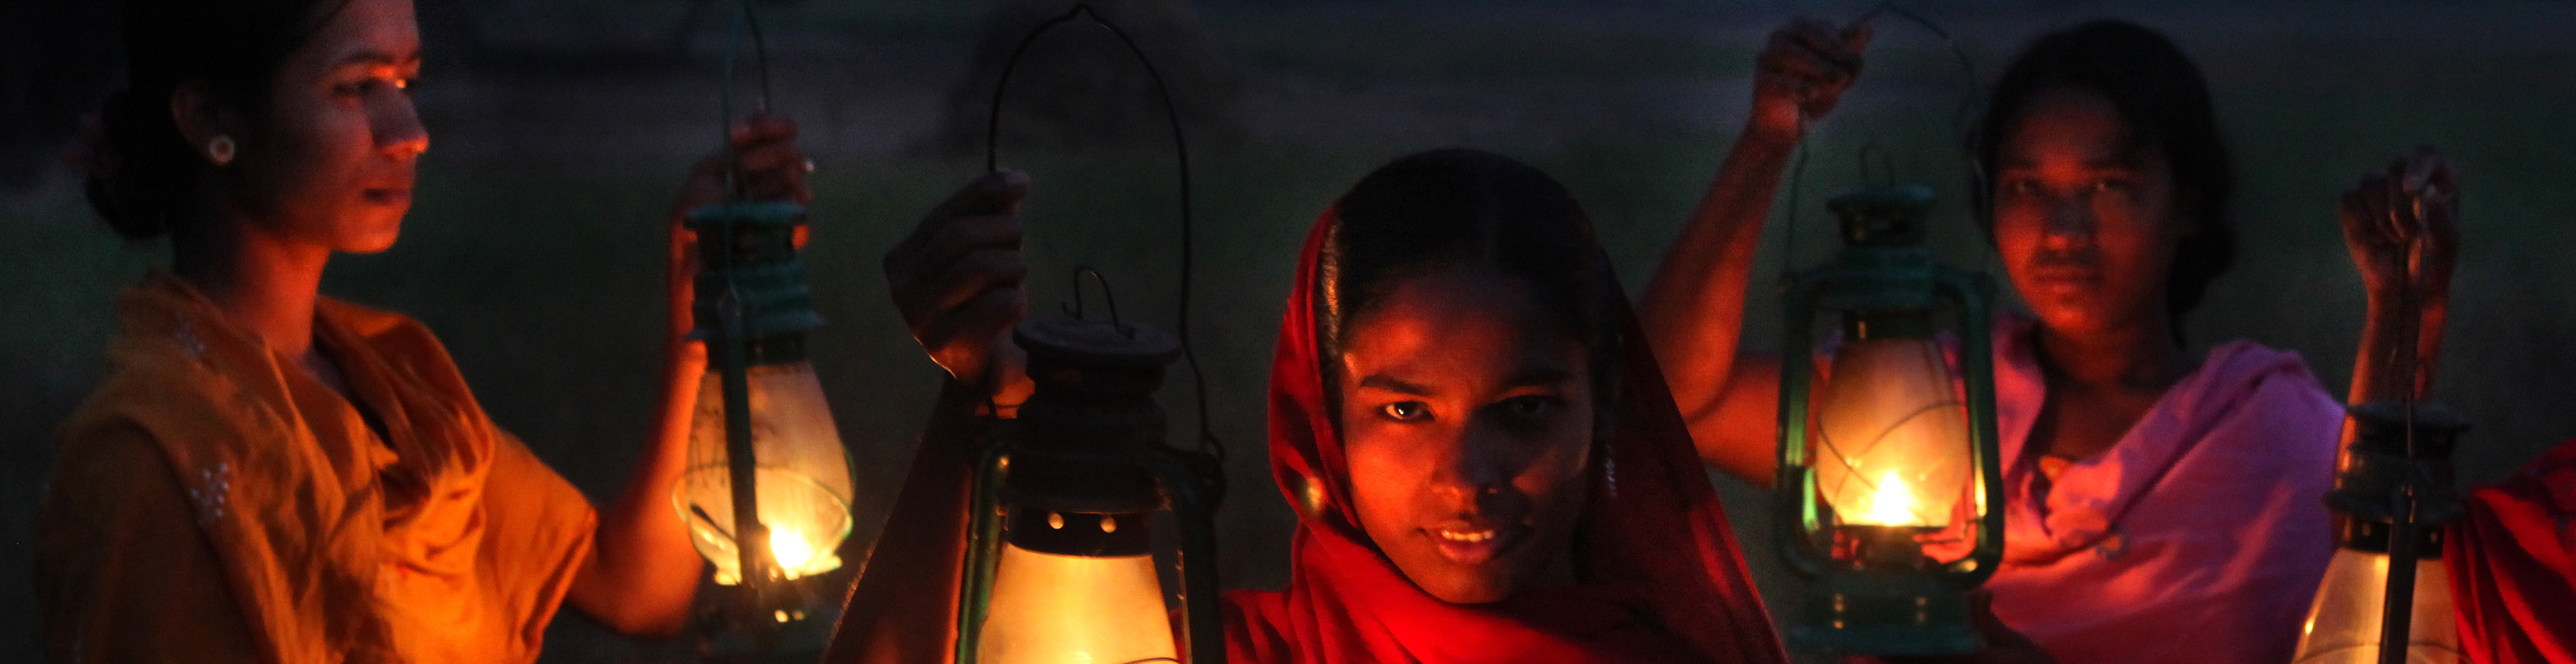 Shonglap girls in Bangladesh with lamps. Photo: Per Fronth